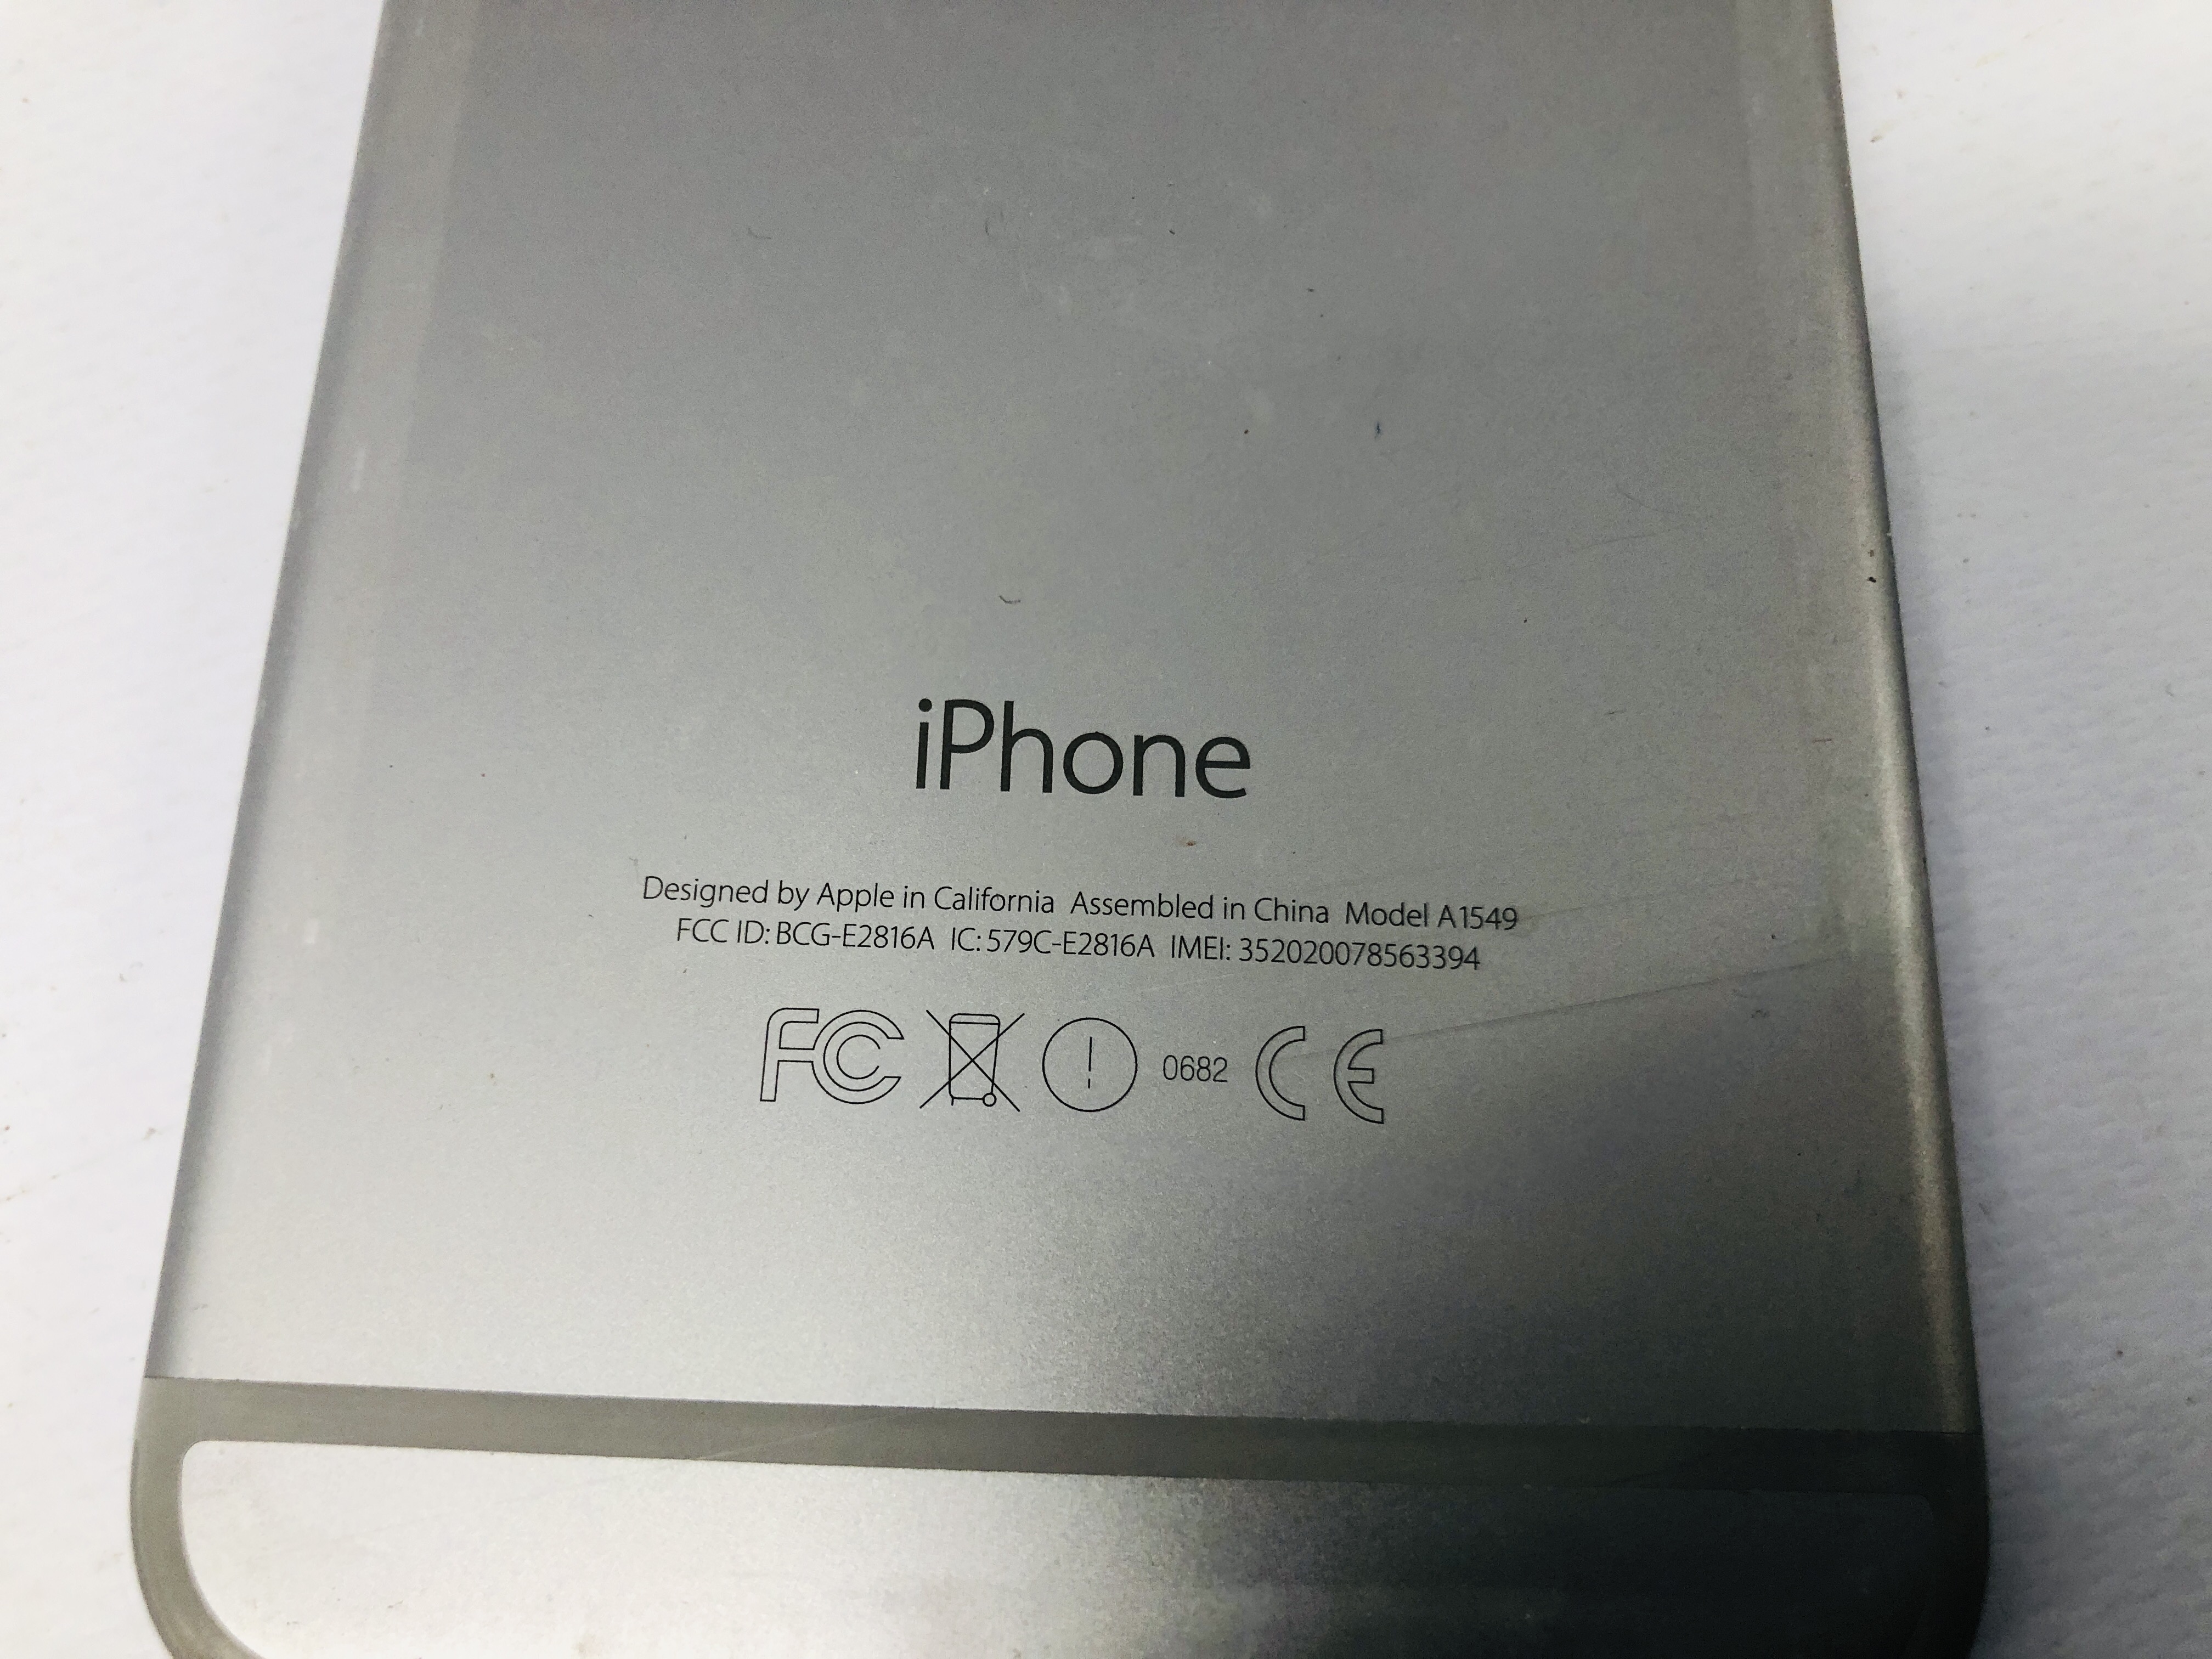 APPLE IPHONE 6 32GB - NO GUARANTEE OF CONNECTIVITY. SOLD AS SEEN. - Image 6 of 6